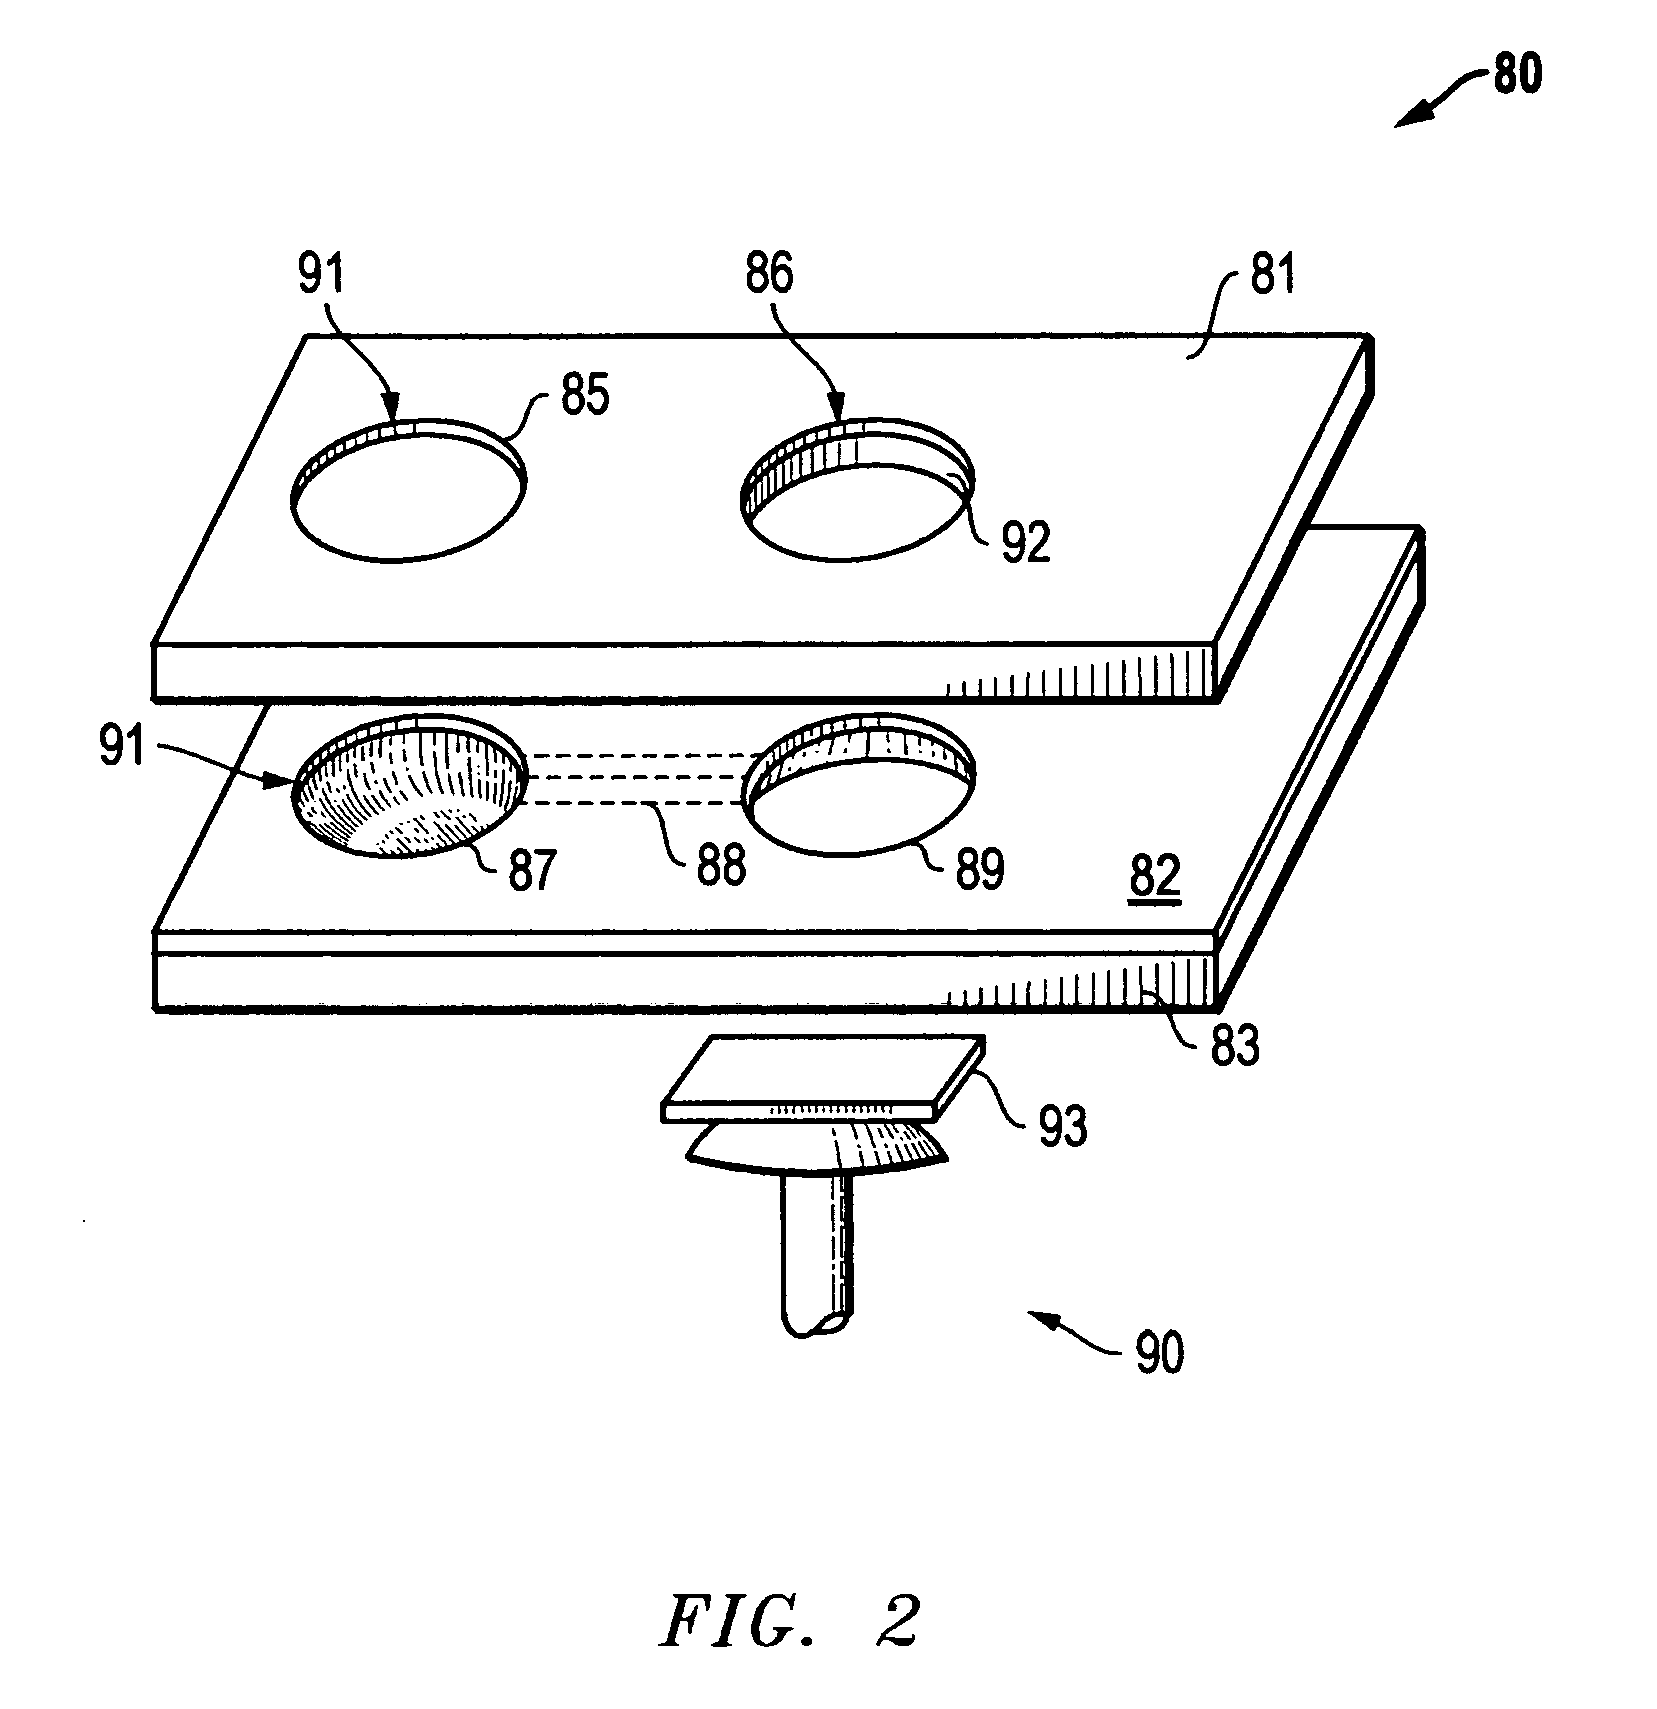 Apparatus and method for selectively channeling a fluid